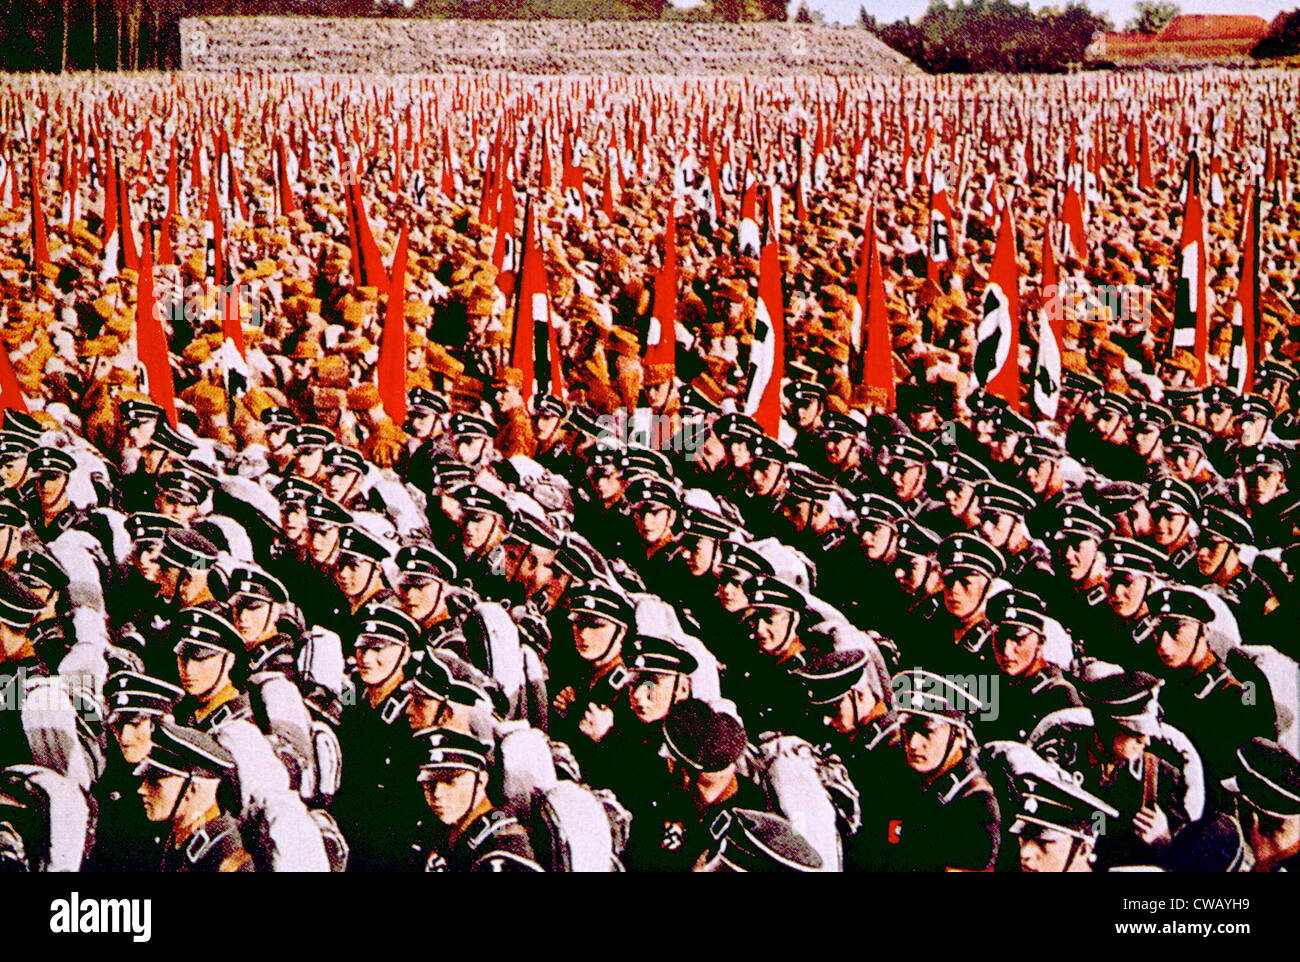 Nazi Germany, SS (Schutzsteffel) and SA (Sturmabteilung) troops at Nuremberg rally, 1933. Stock Photo